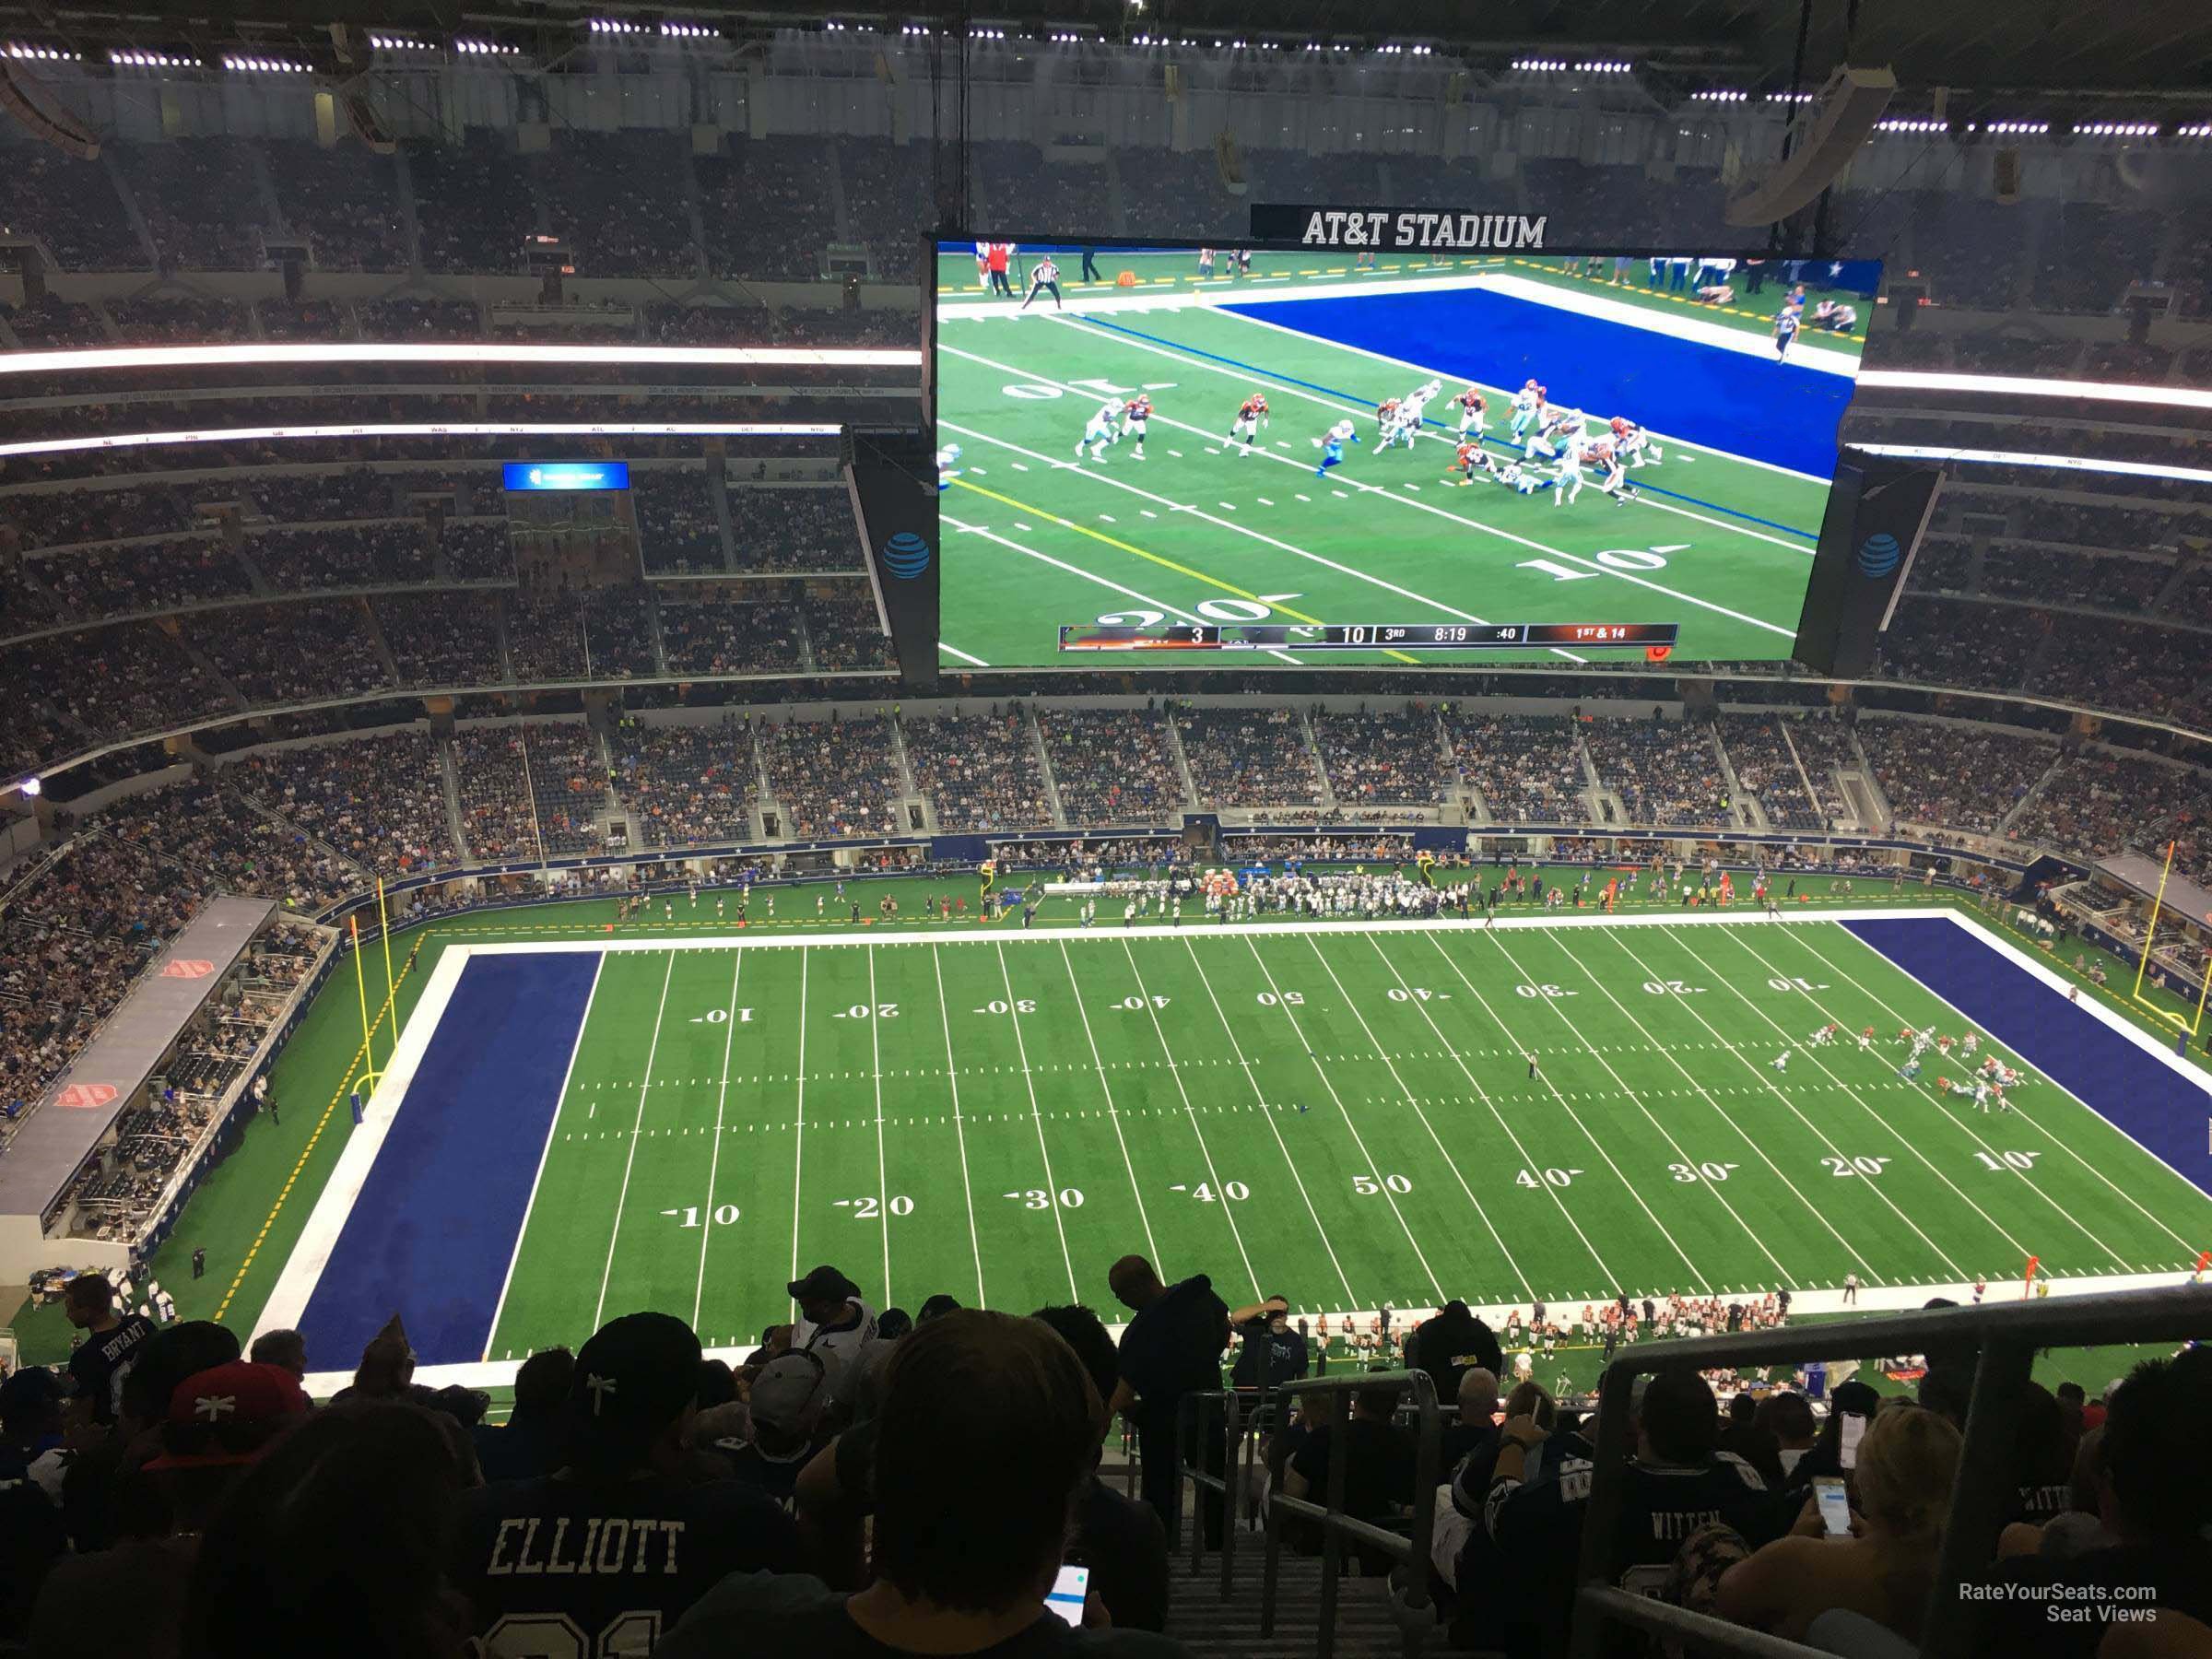 section 450, row 22 seat view  for football - at&t stadium (cowboys stadium)